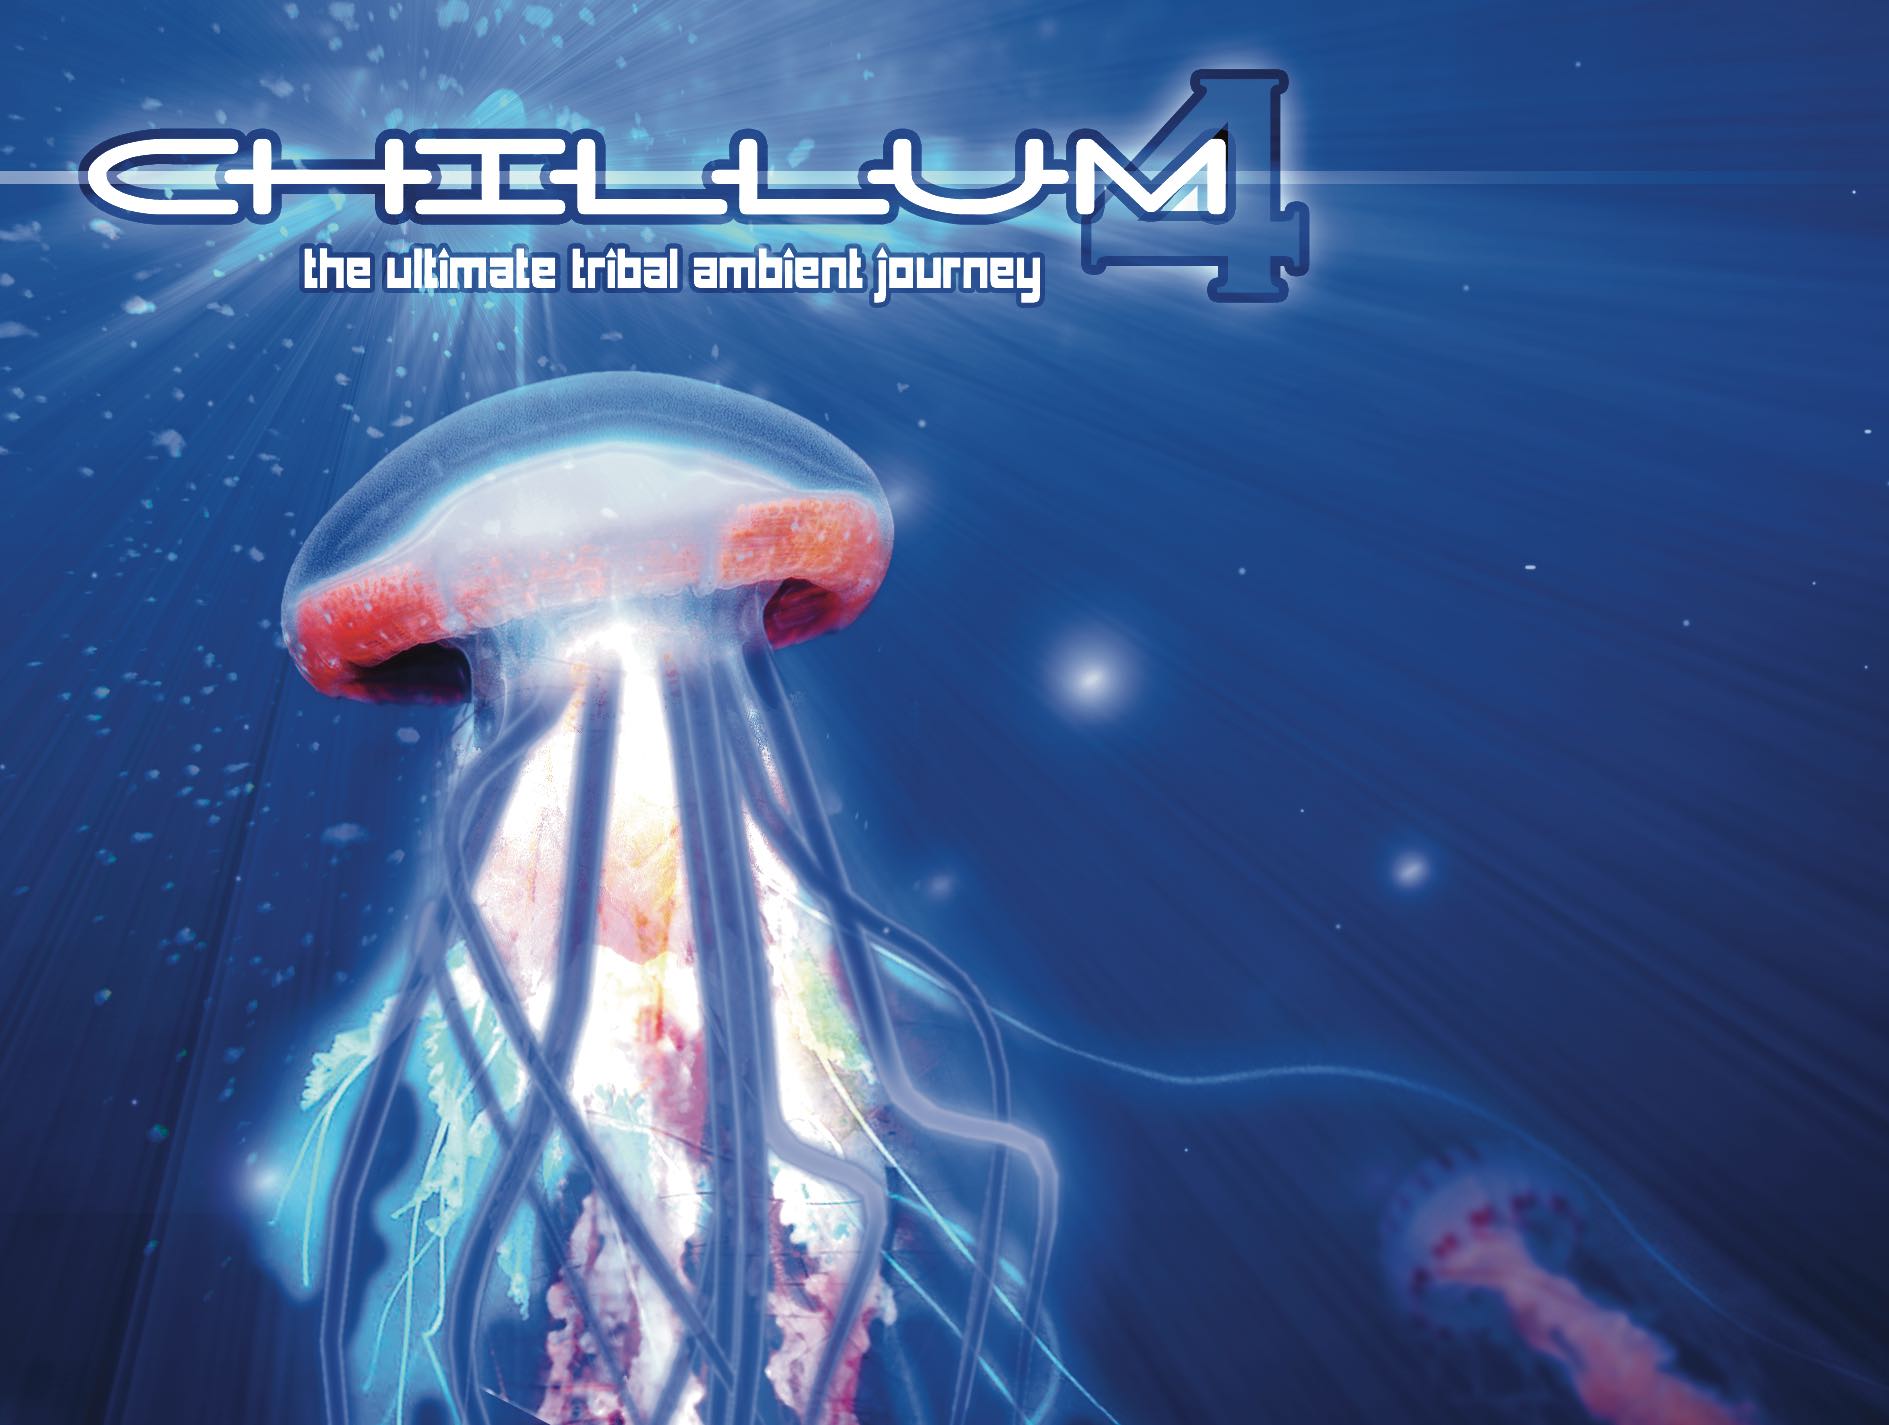 Print-CD Cover: Chillum 4- The ultimate tribal ambient journey  